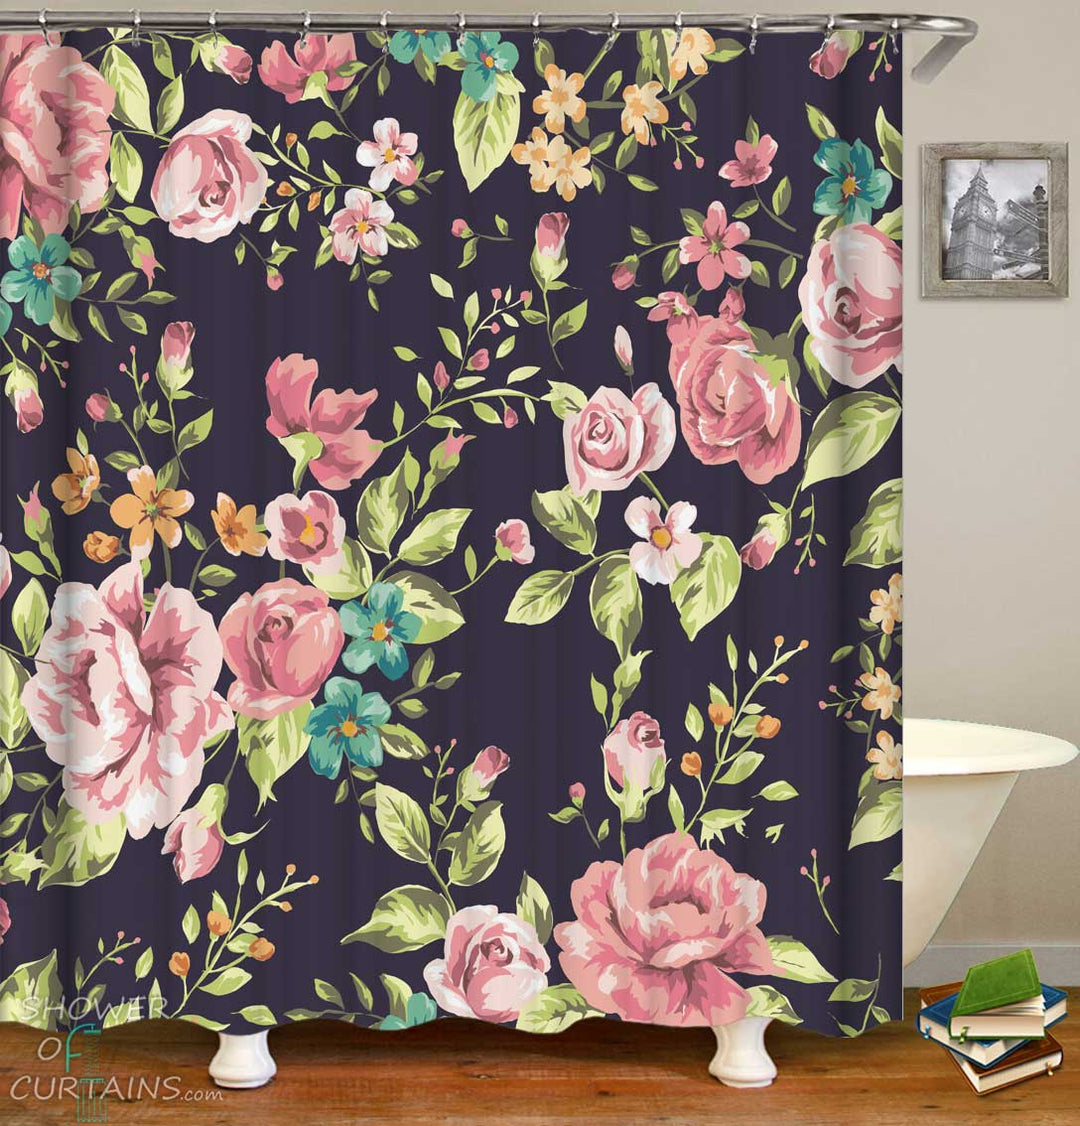 Shower Curtains with Old Style Roses Over Light Black